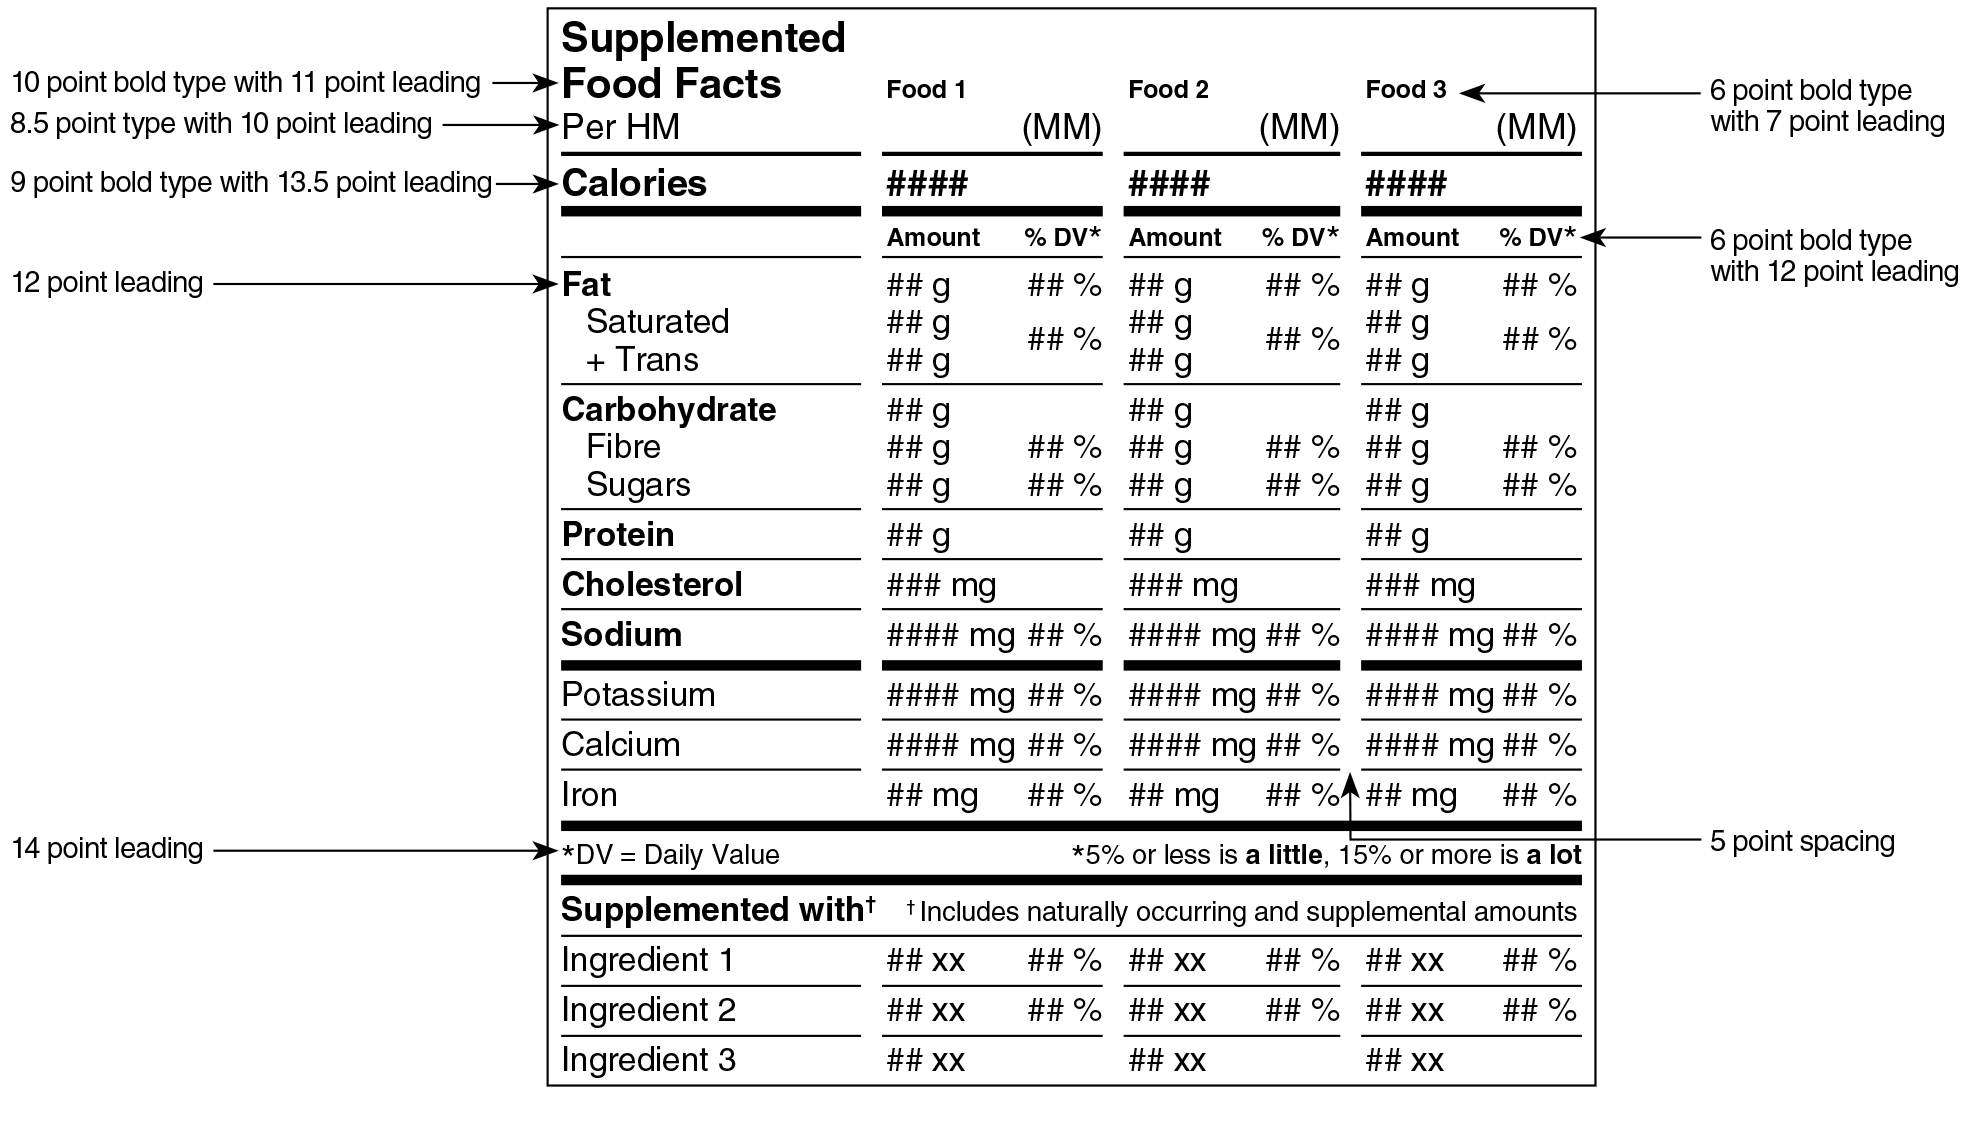 An English Supplemented Food Facts table in aggregate format for three different foods surrounded by specifications. Text version below.